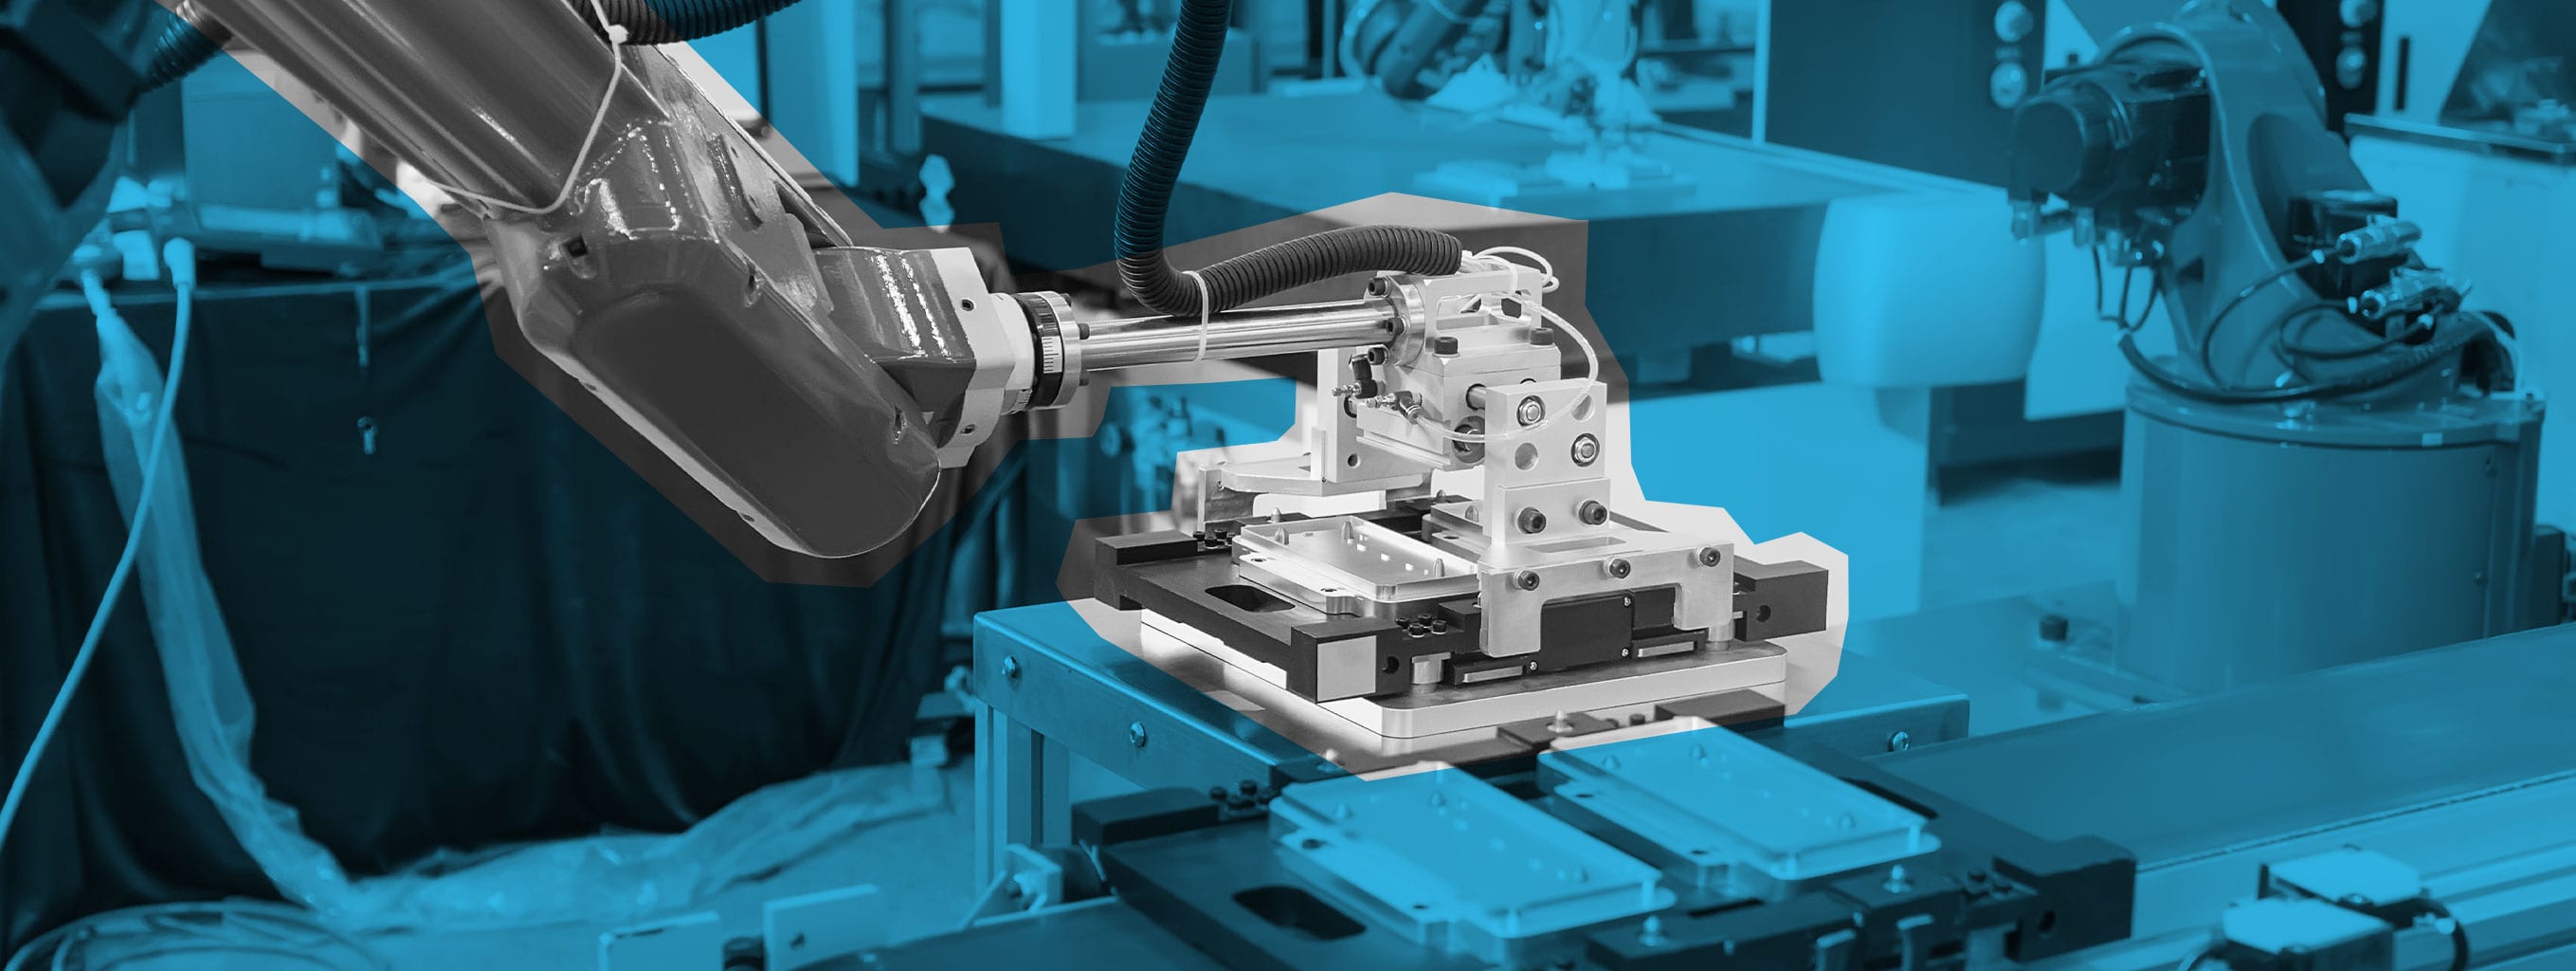 How Discrete Manufacturing can benefit from Integrated Business Planning